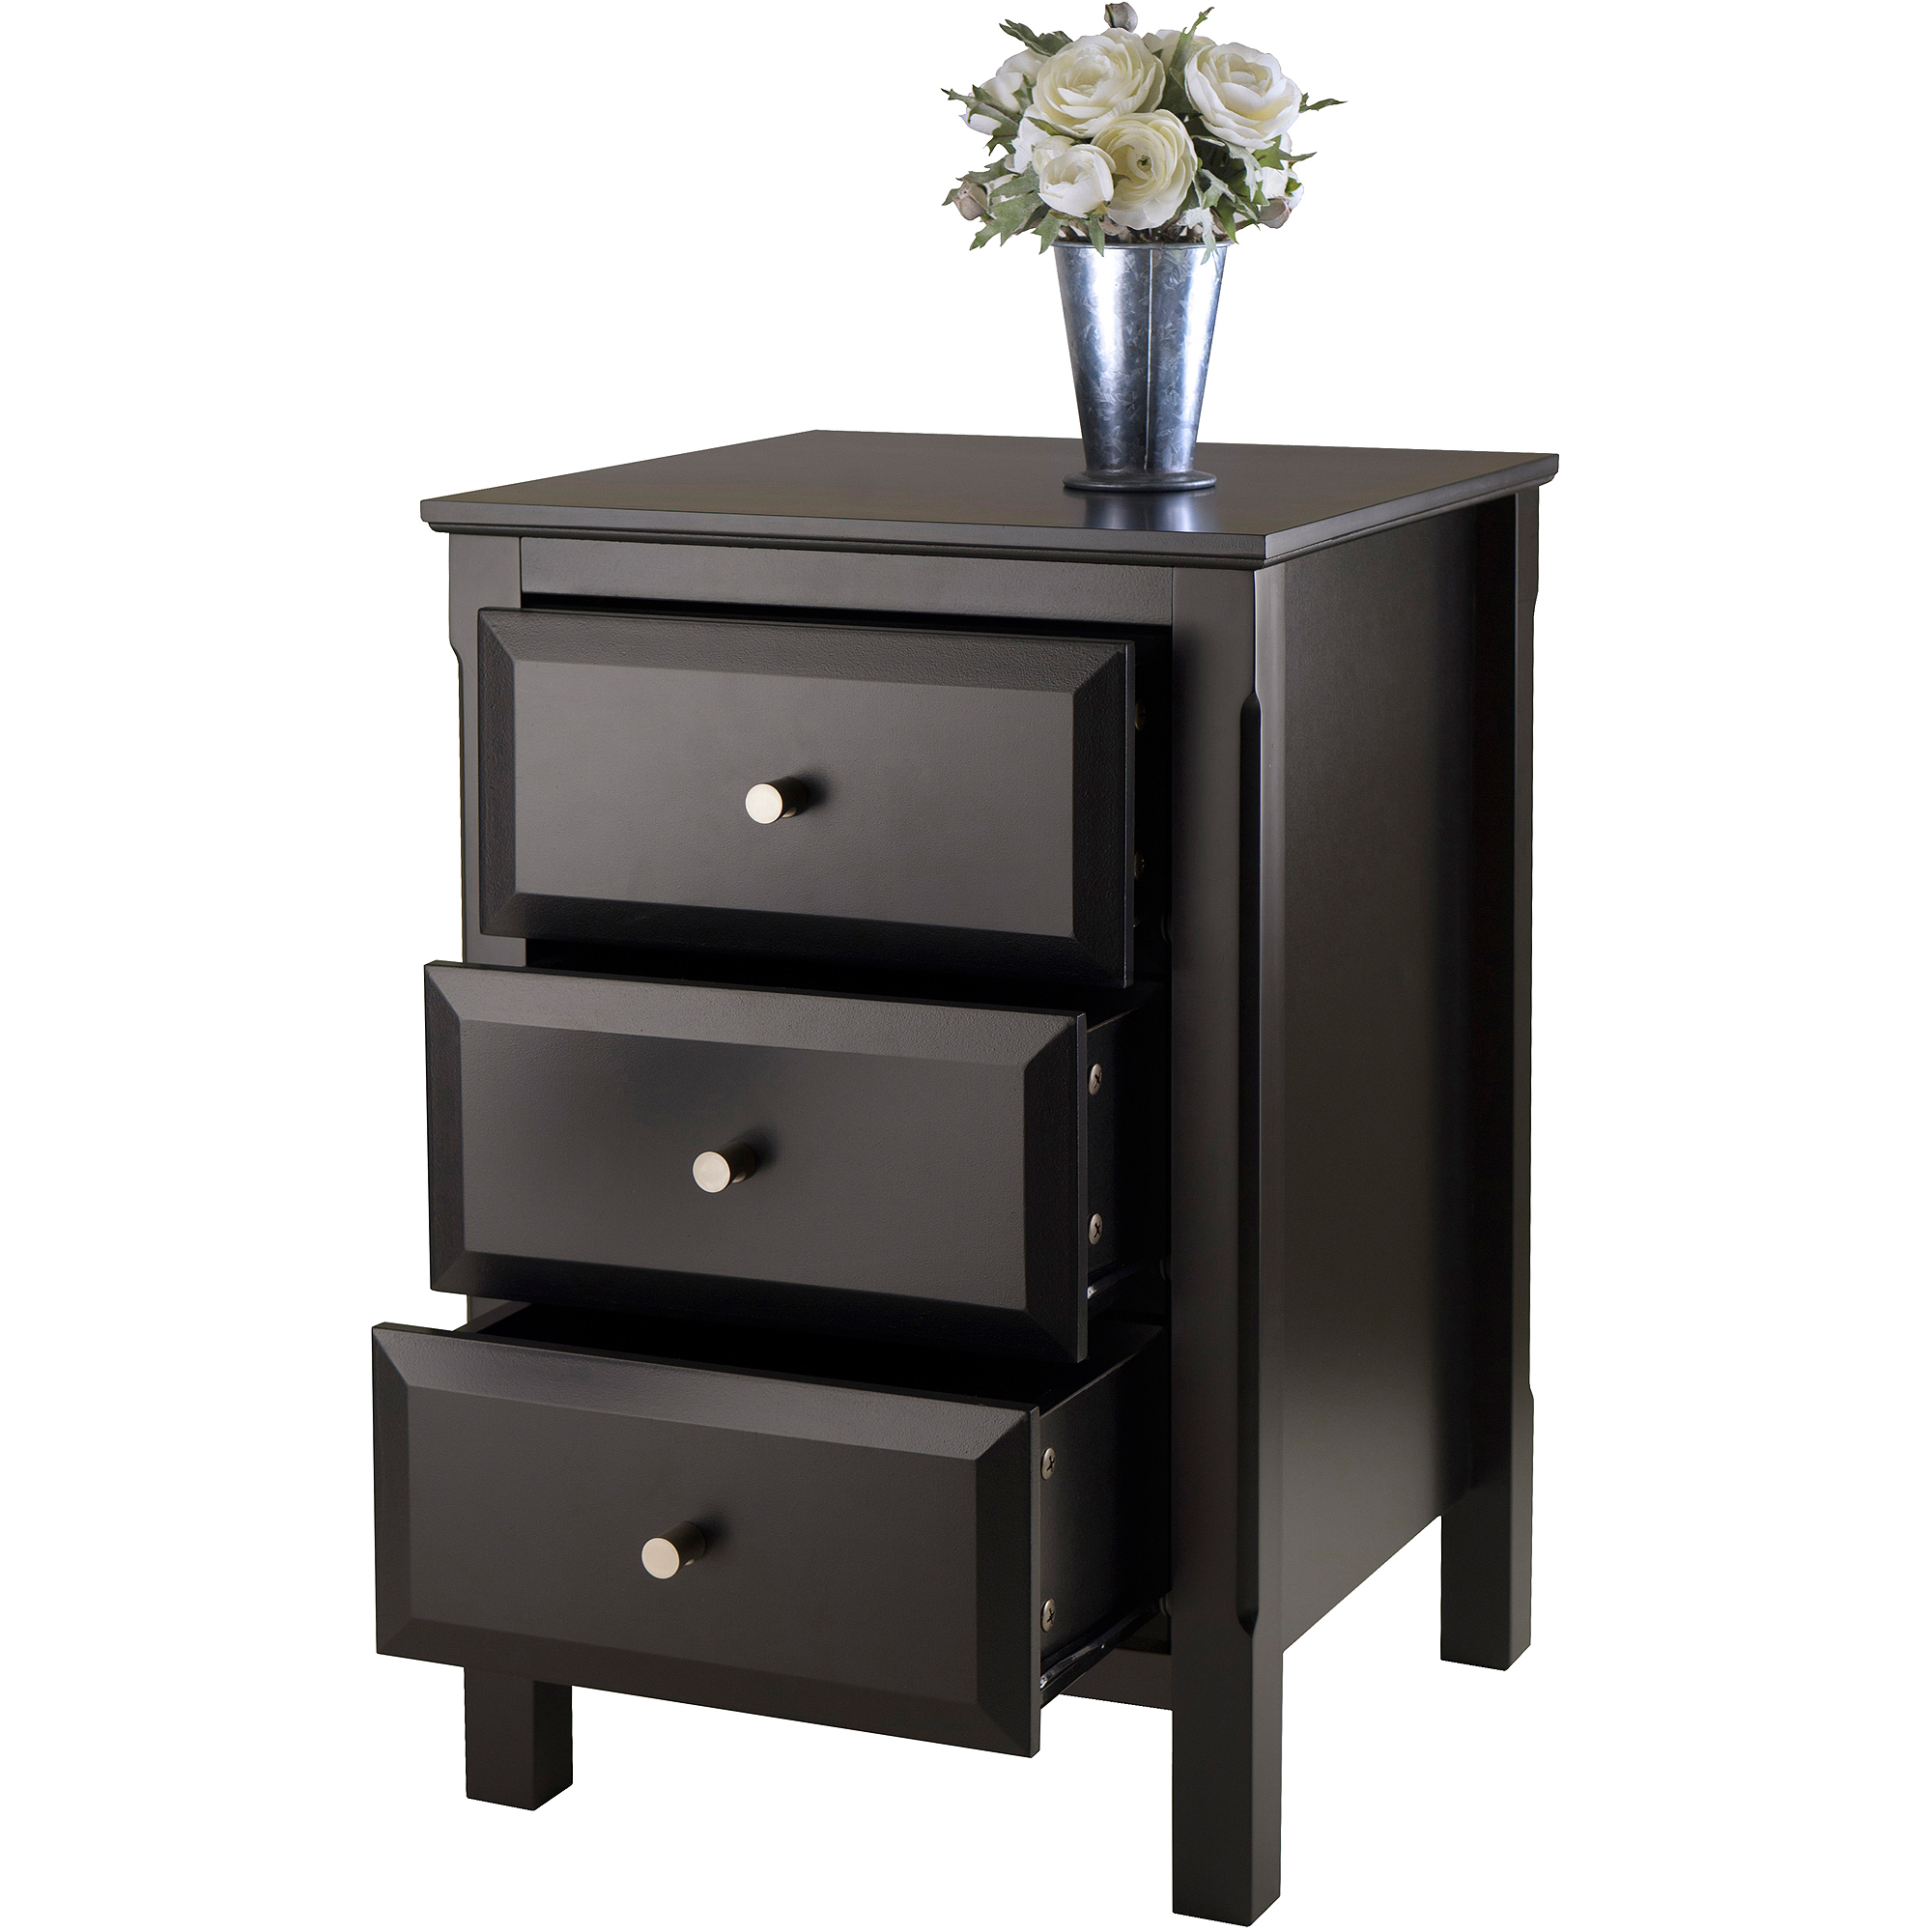 winsome timmy nightstand accent table black end with three drawers faux marble set lazy boy wall decor laura ashley charleston furniture riverside craftsman long leather sofa